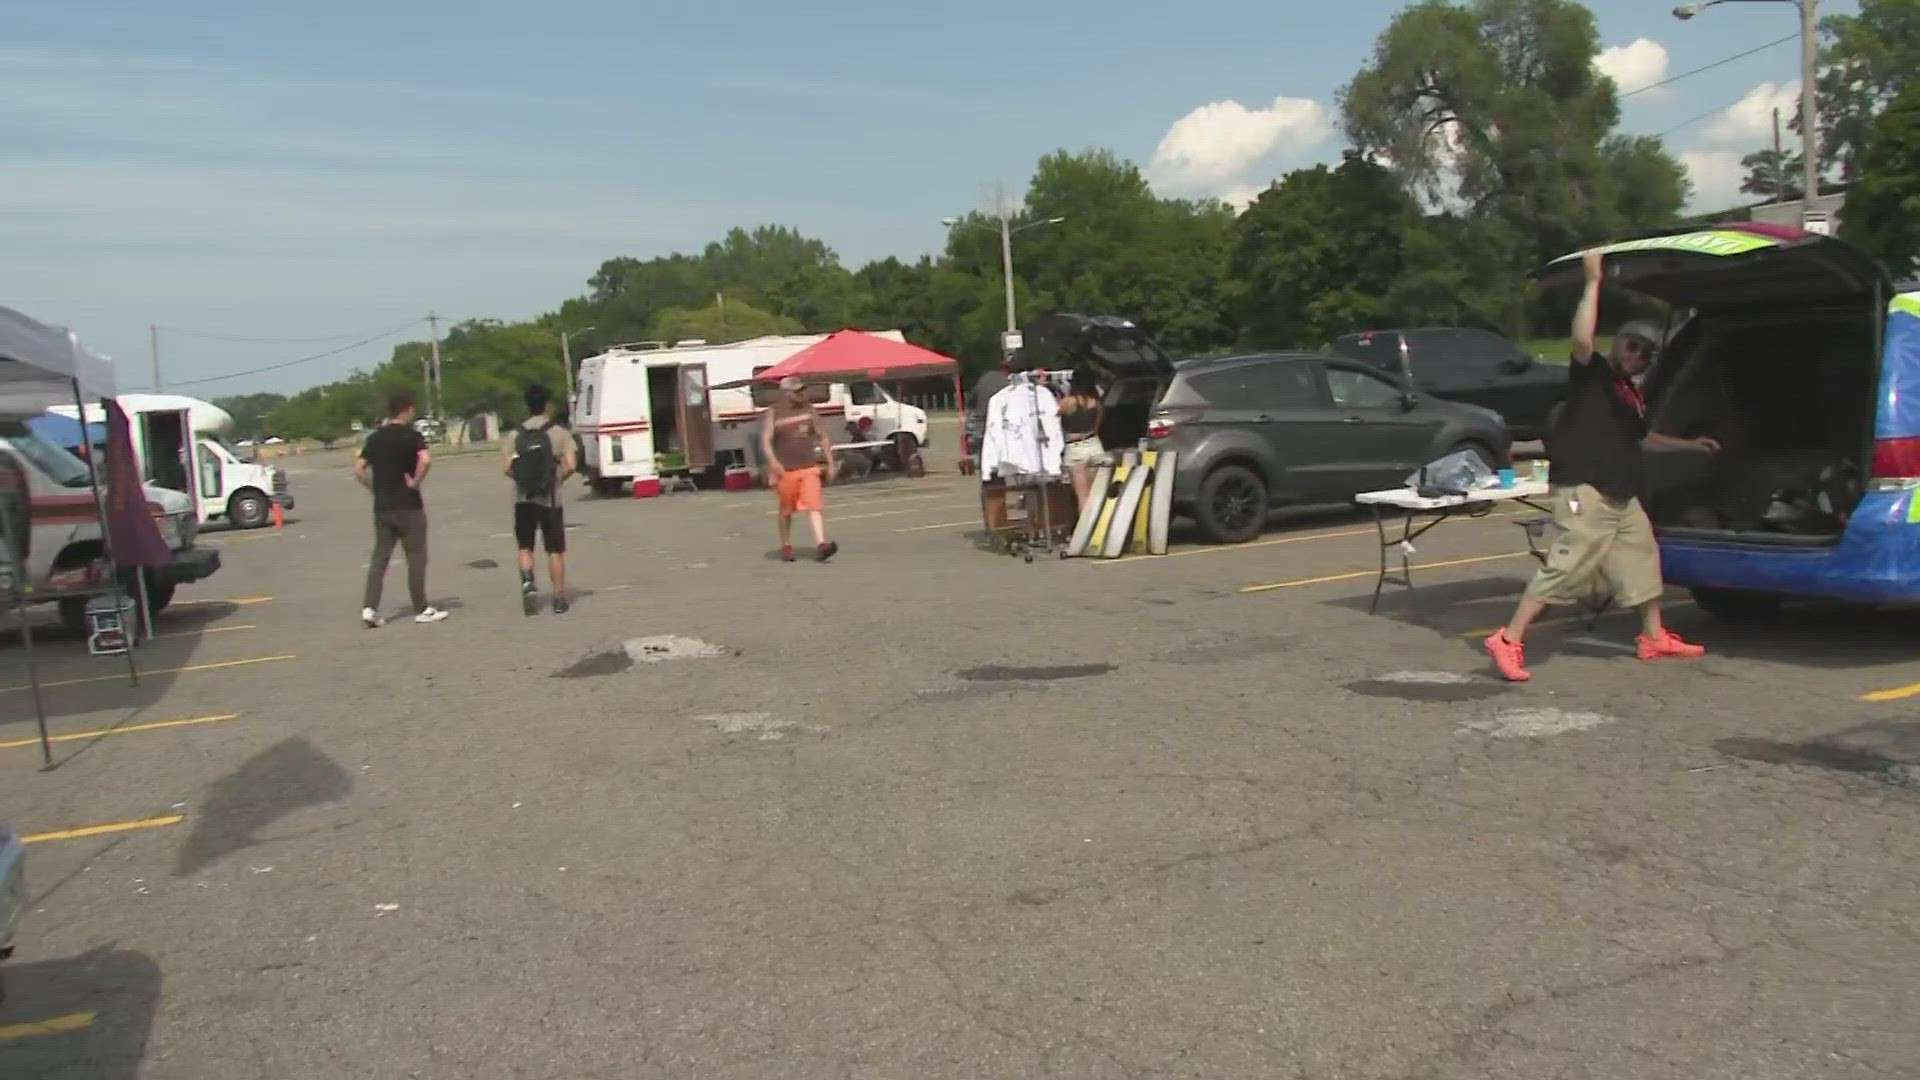 Muni Lot parking, traffic information for Browns-Commanders game